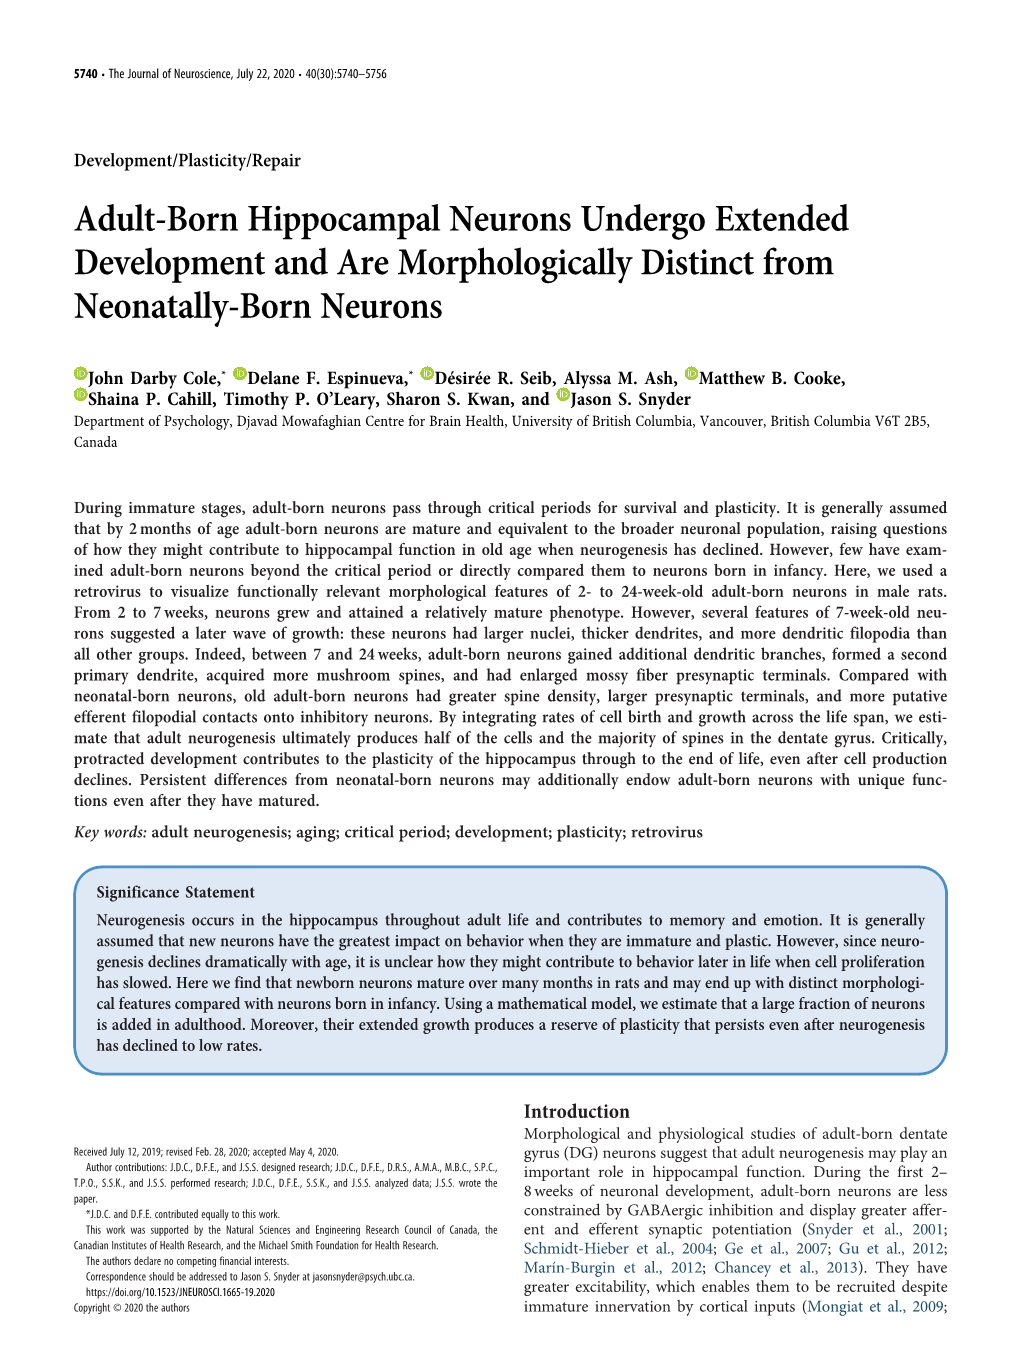 Adult-Born Hippocampal Neurons Undergo Extended Development and Are Morphologically Distinct from Neonatally-Born Neurons